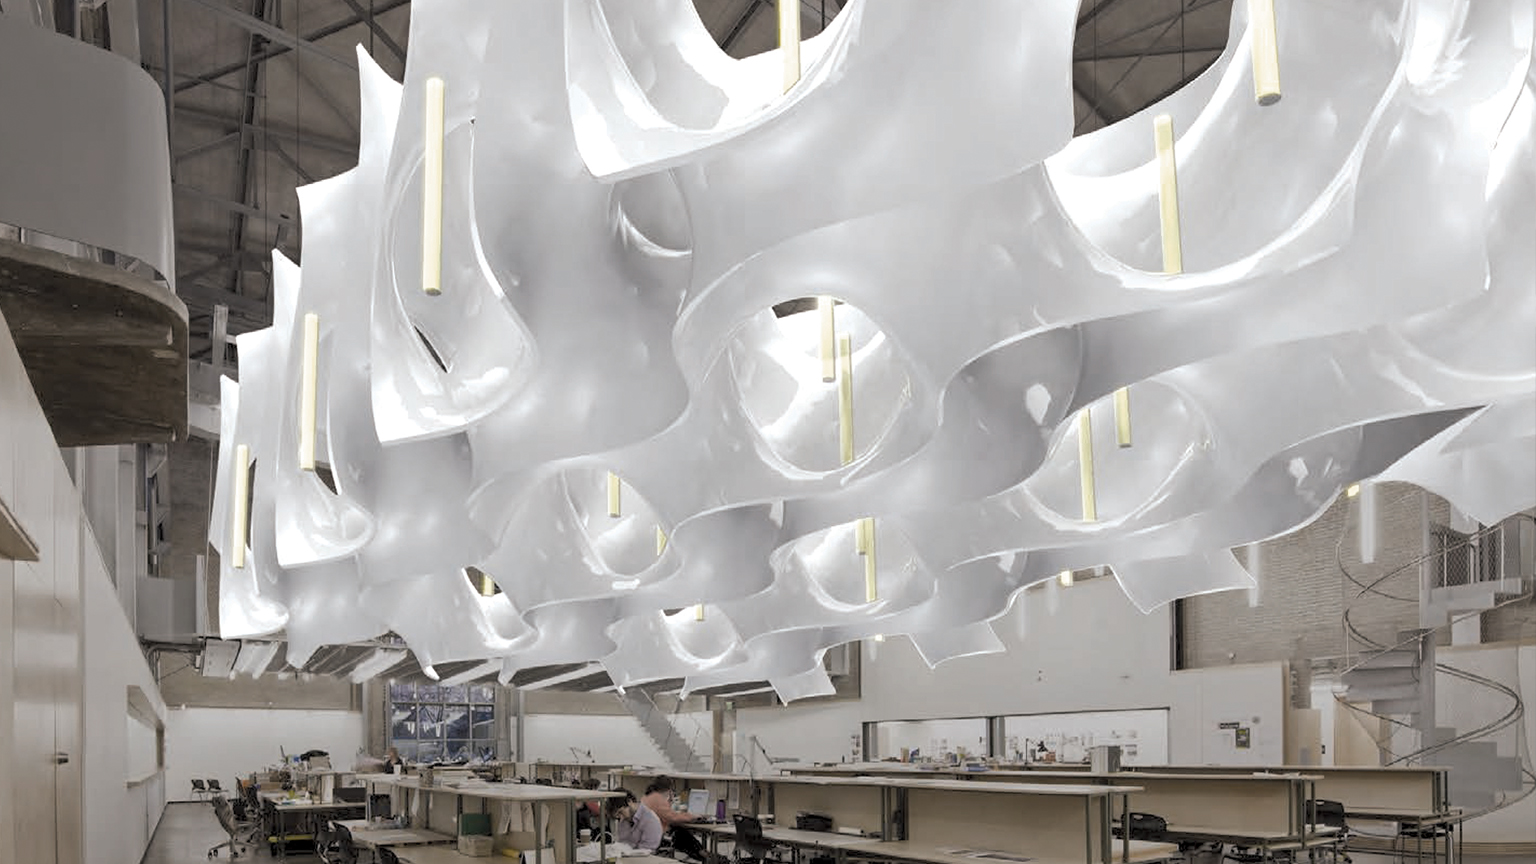 22nd Century Cloud: a Hinman Research Building Installation from the Parametric Design class